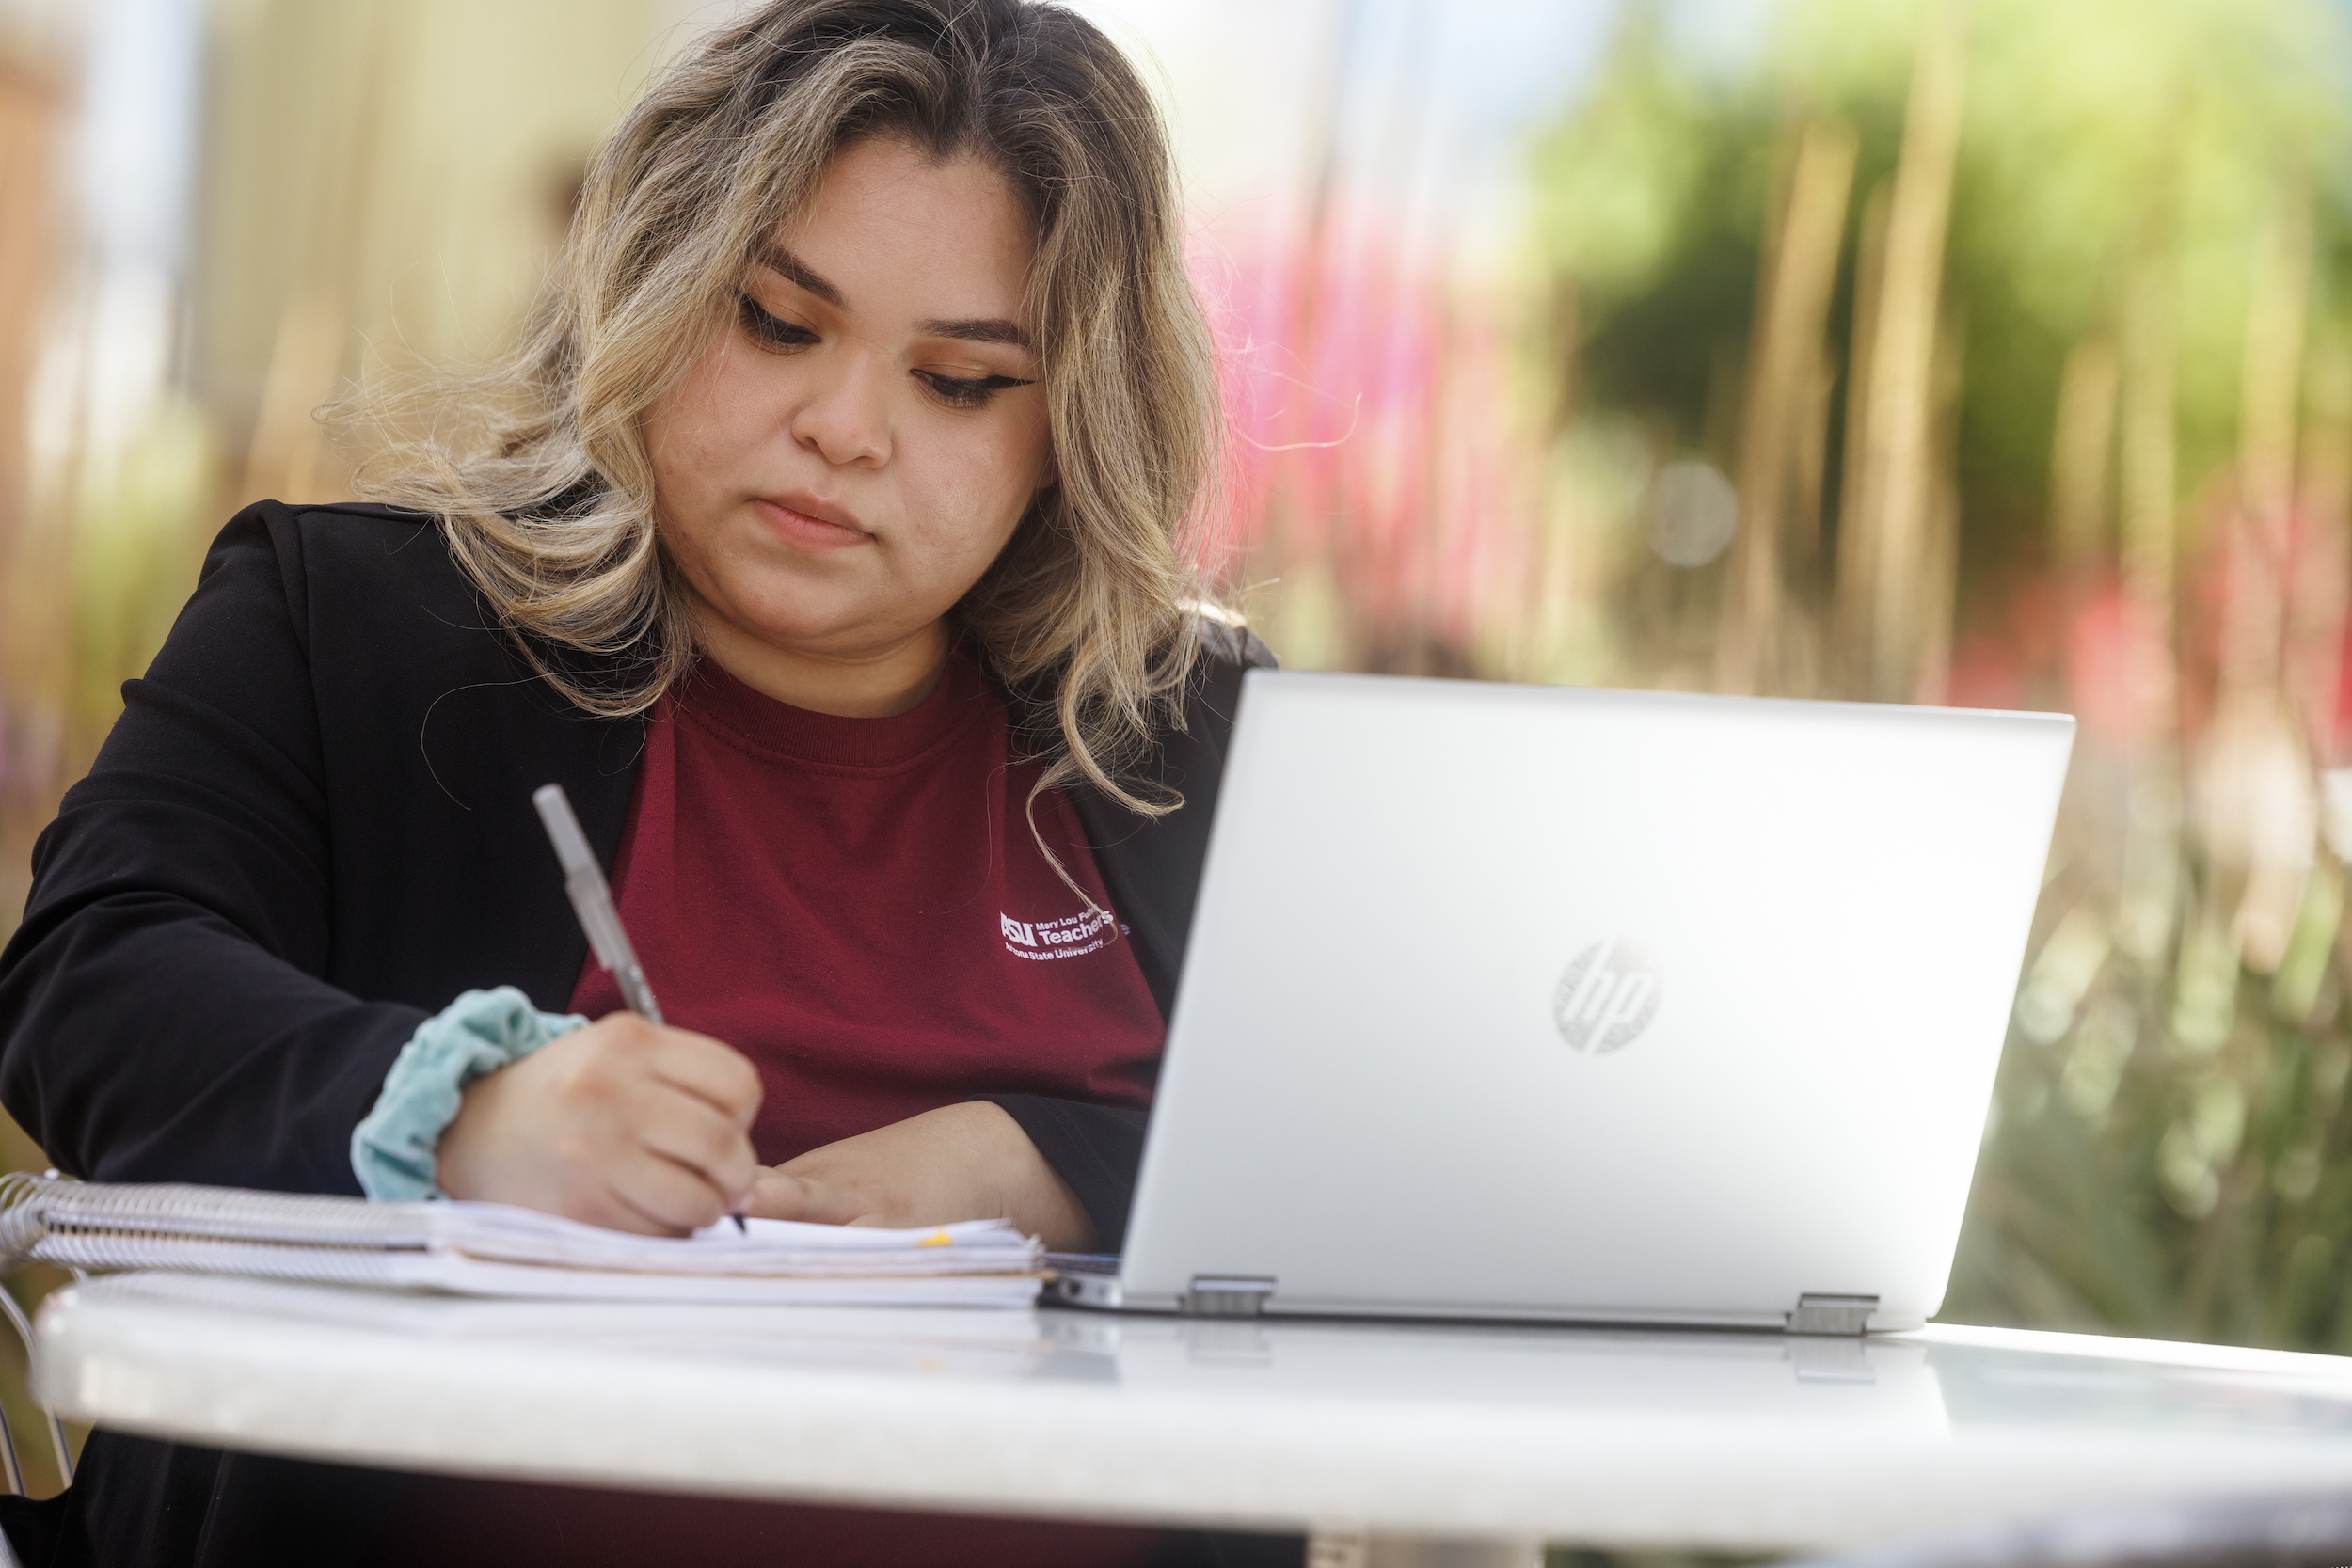 Student writing in a notebook with a laptop on an outside table